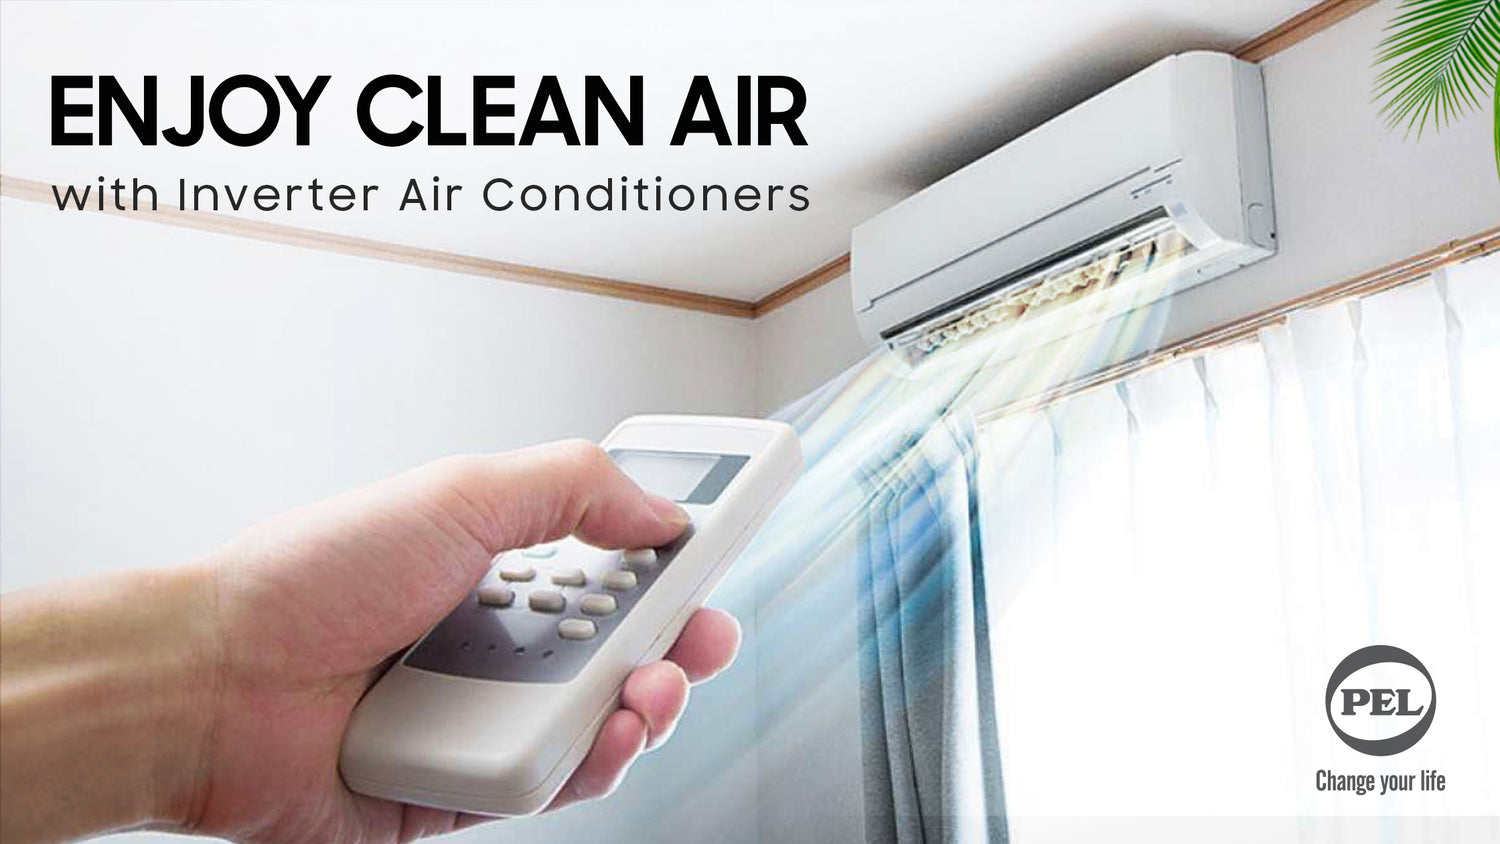 How To Add Value To Your Home With An Air Conditioning Unit?